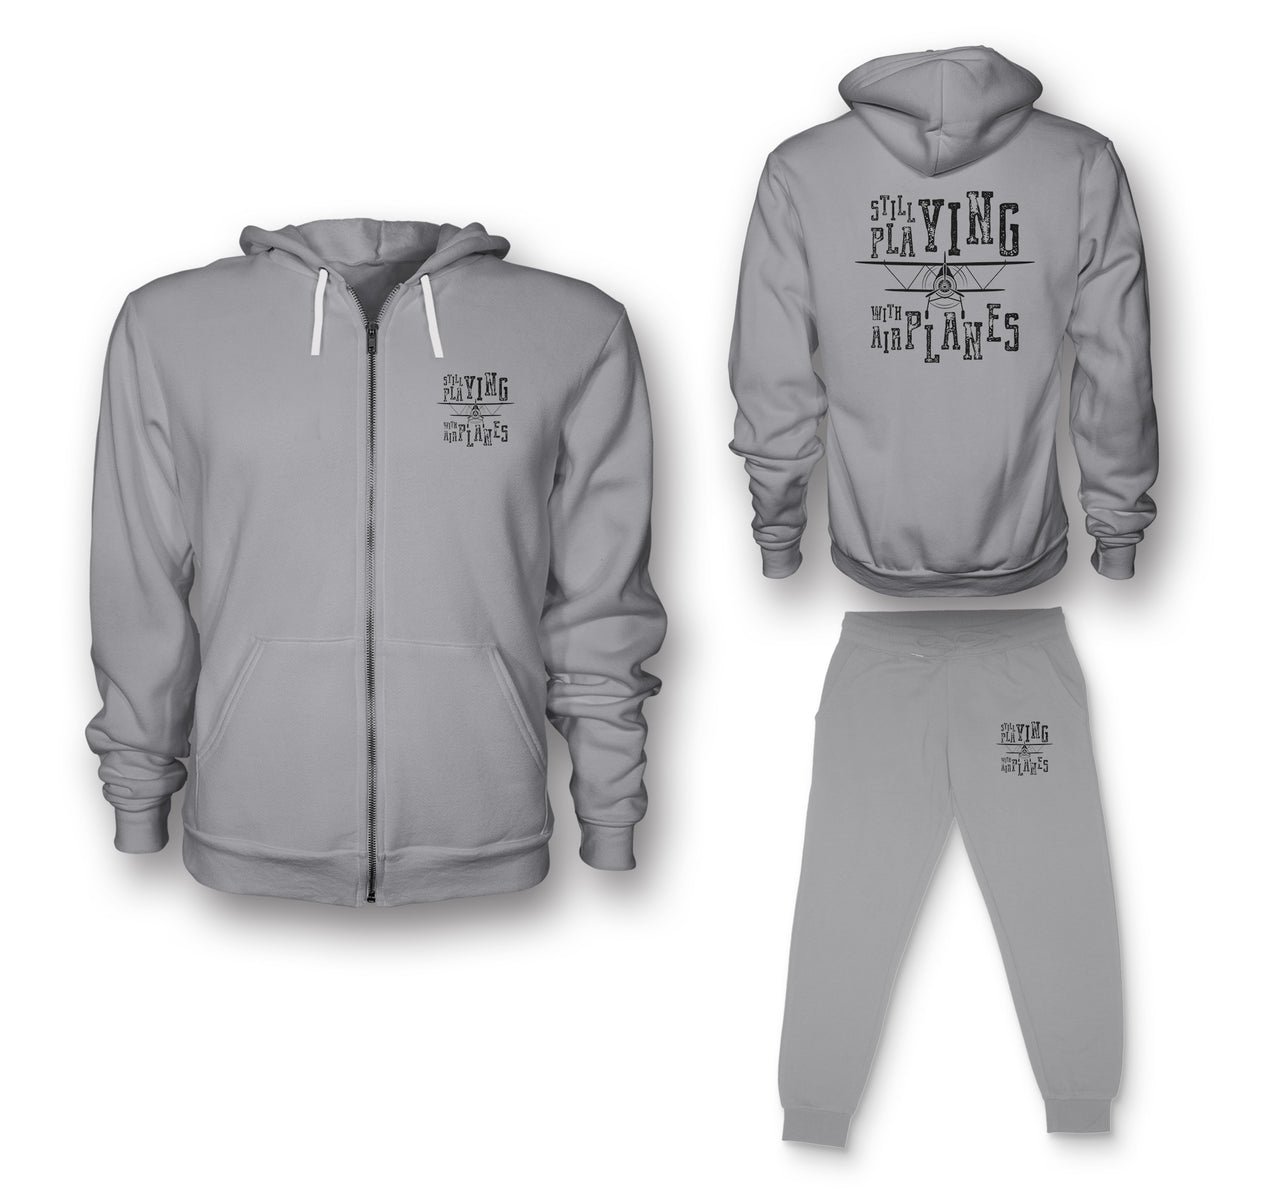 Still Playing With Airplanes Designed Zipped Hoodies & Sweatpants Set